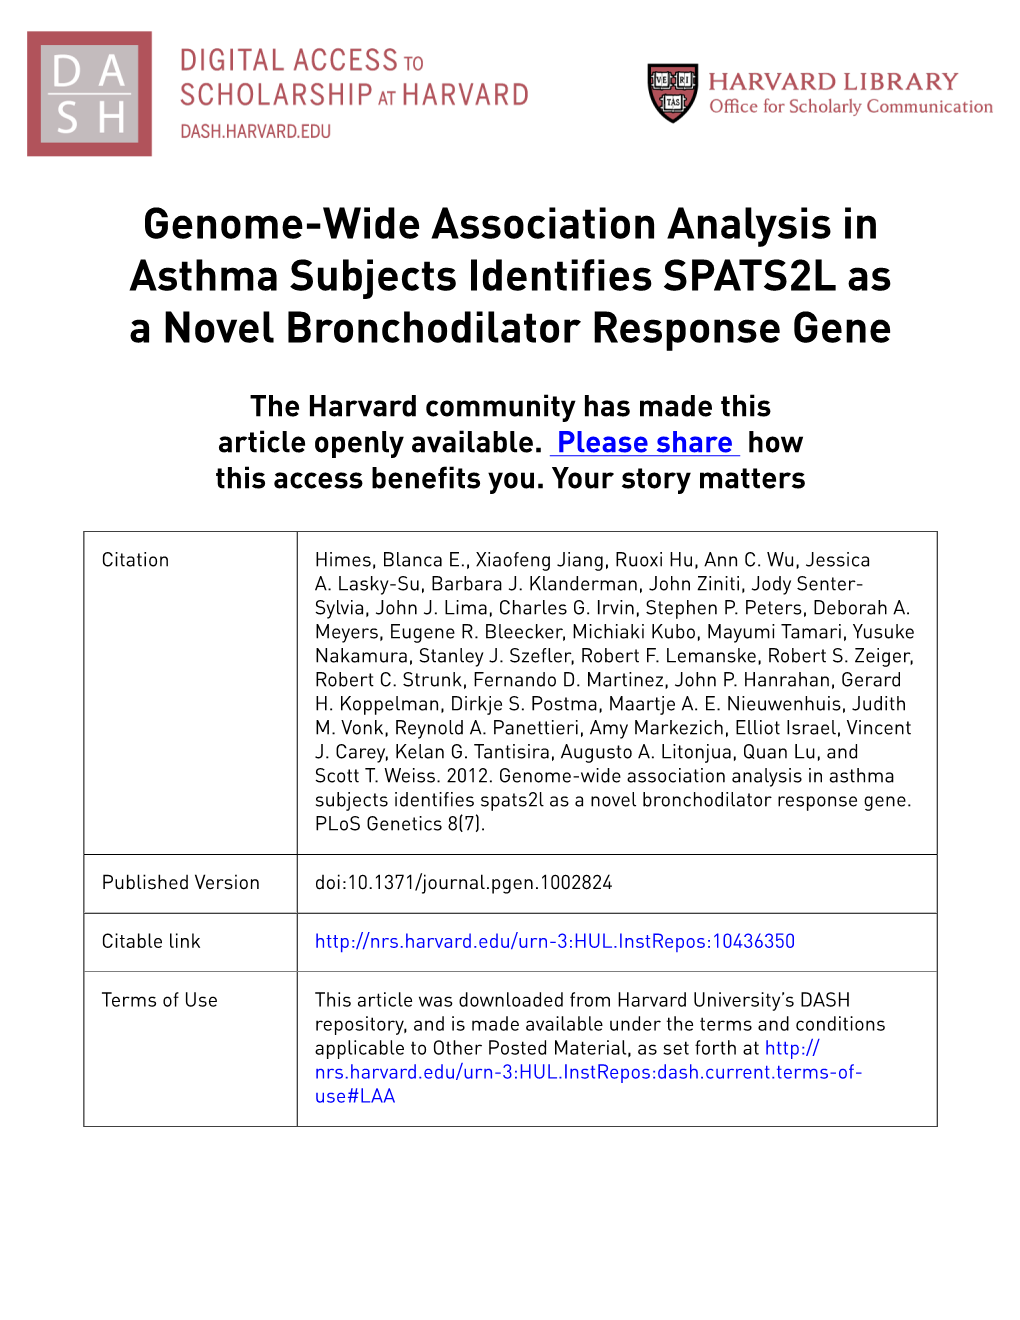 Genome-Wide Association Analysis in Asthma Subjects Identifies SPATS2L As a Novel Bronchodilator Response Gene